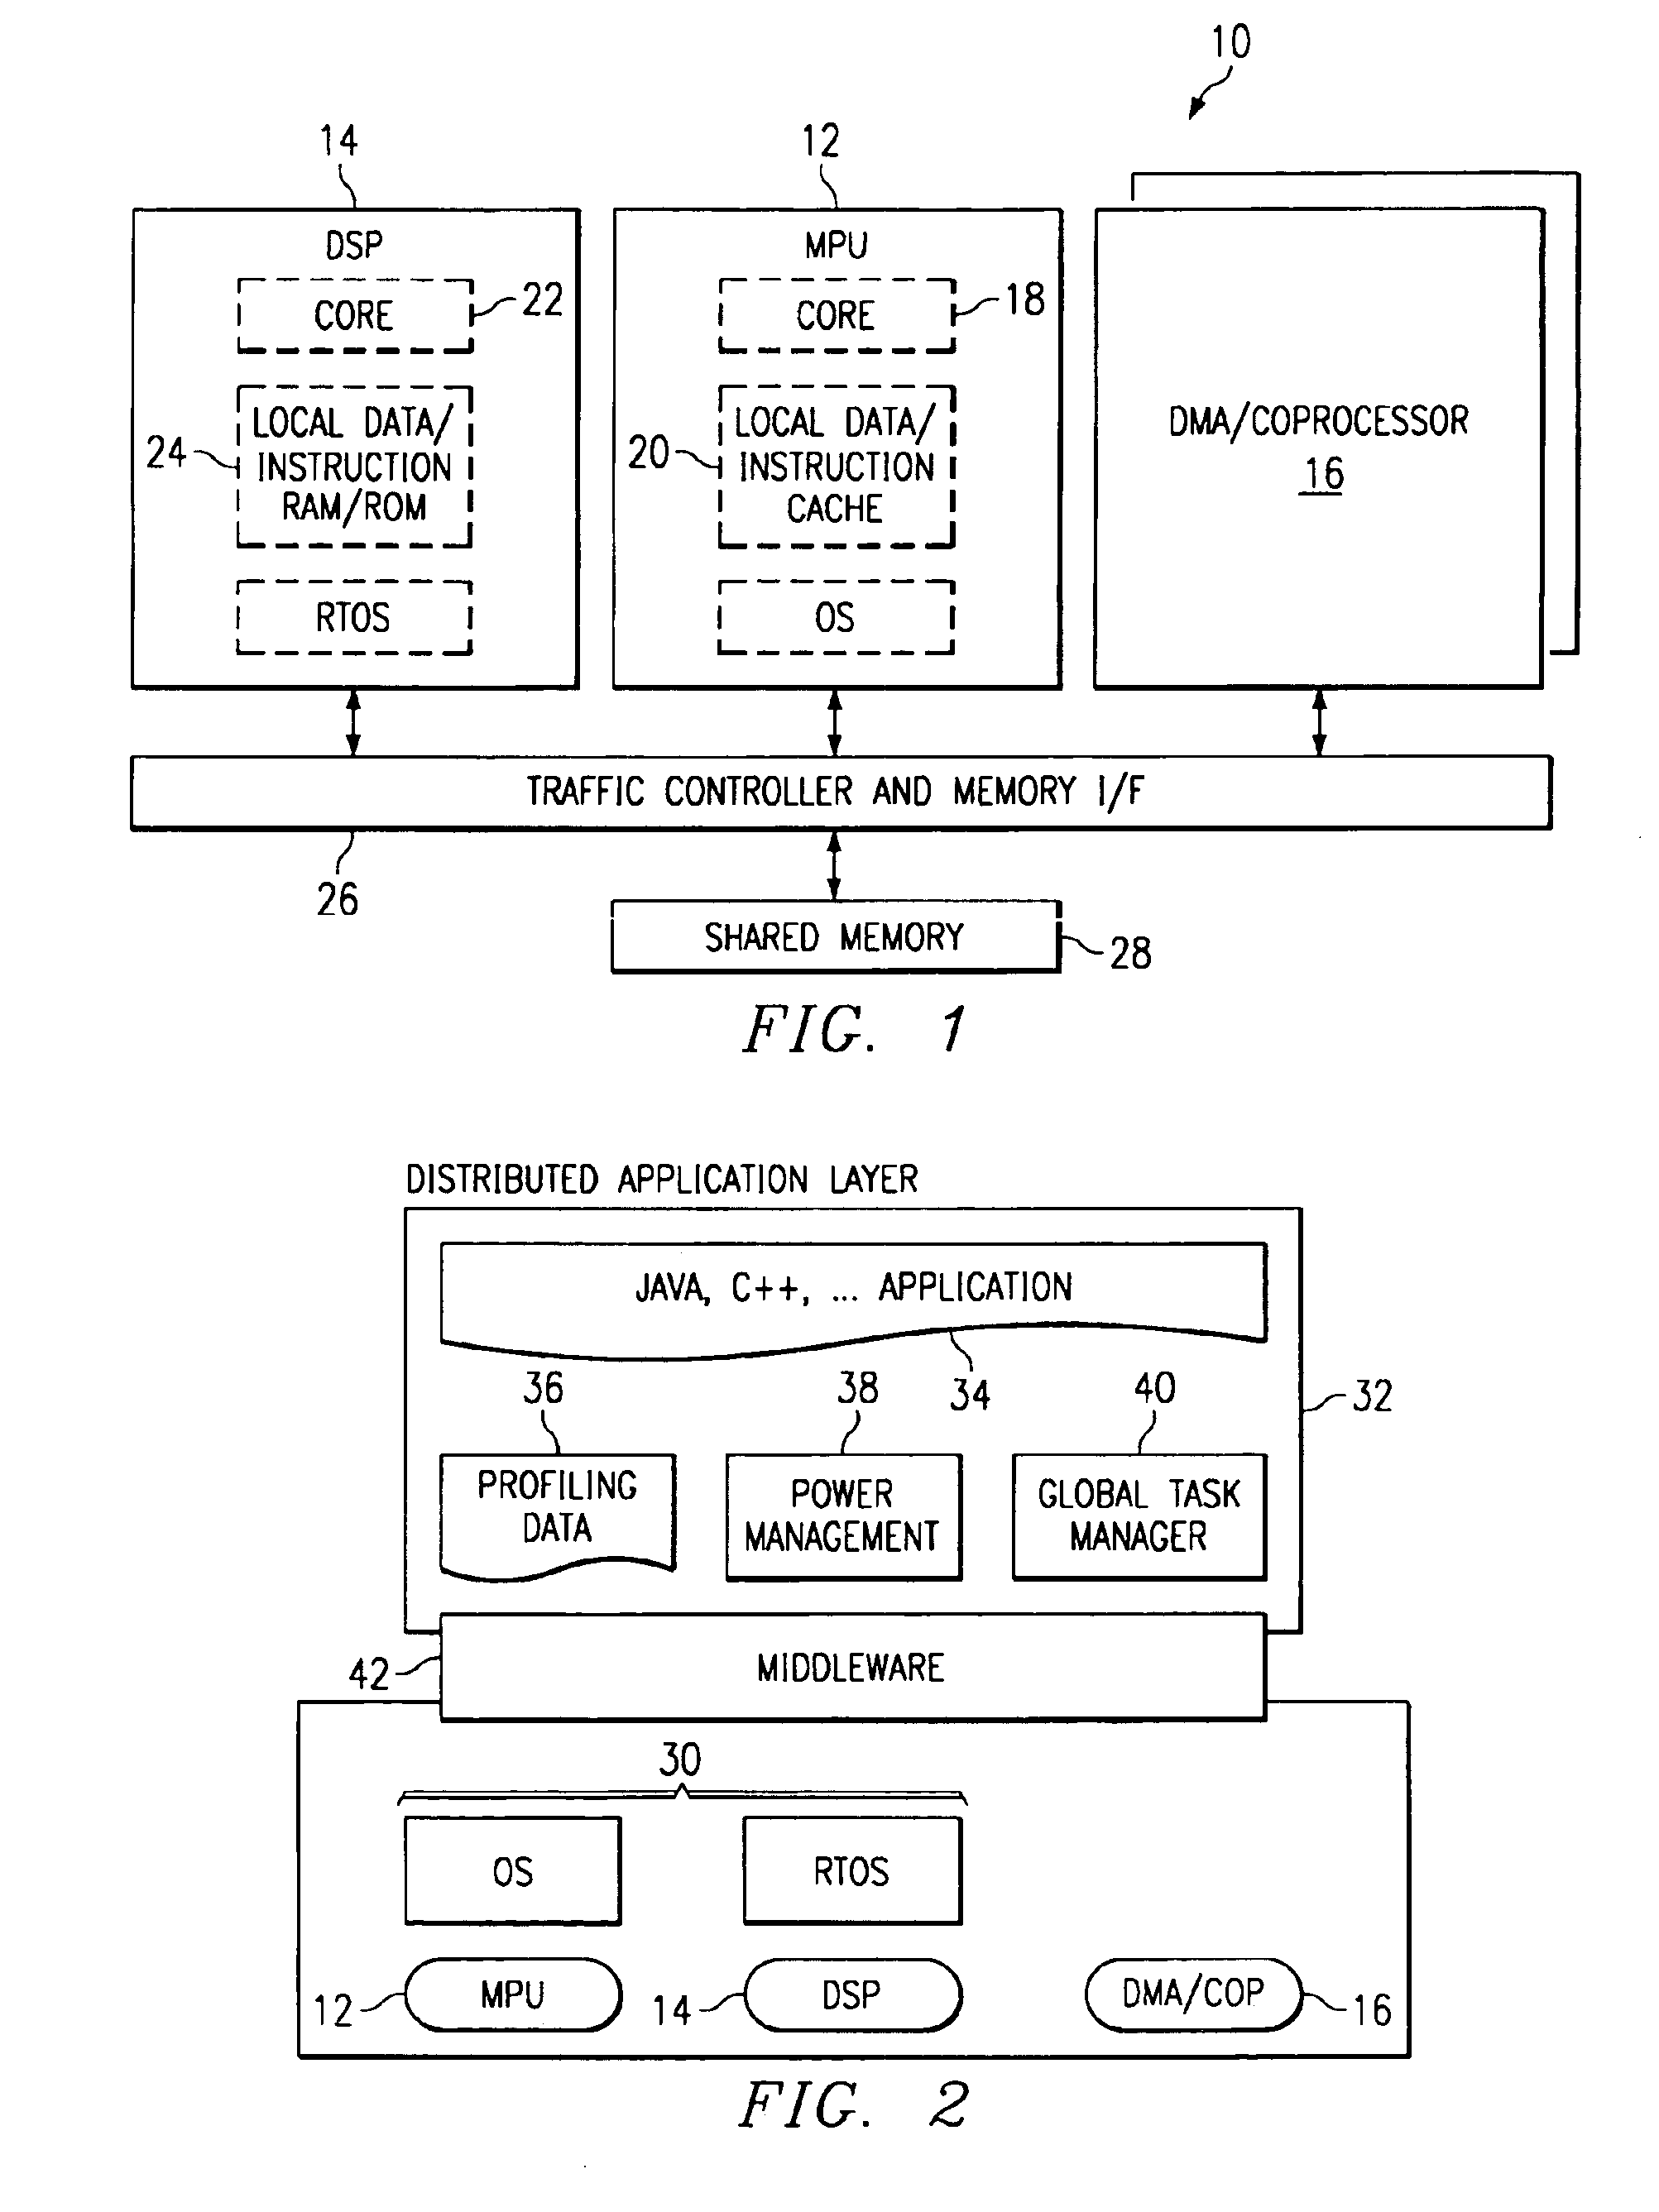 Dynamic hardware control for energy management systems using task attributes